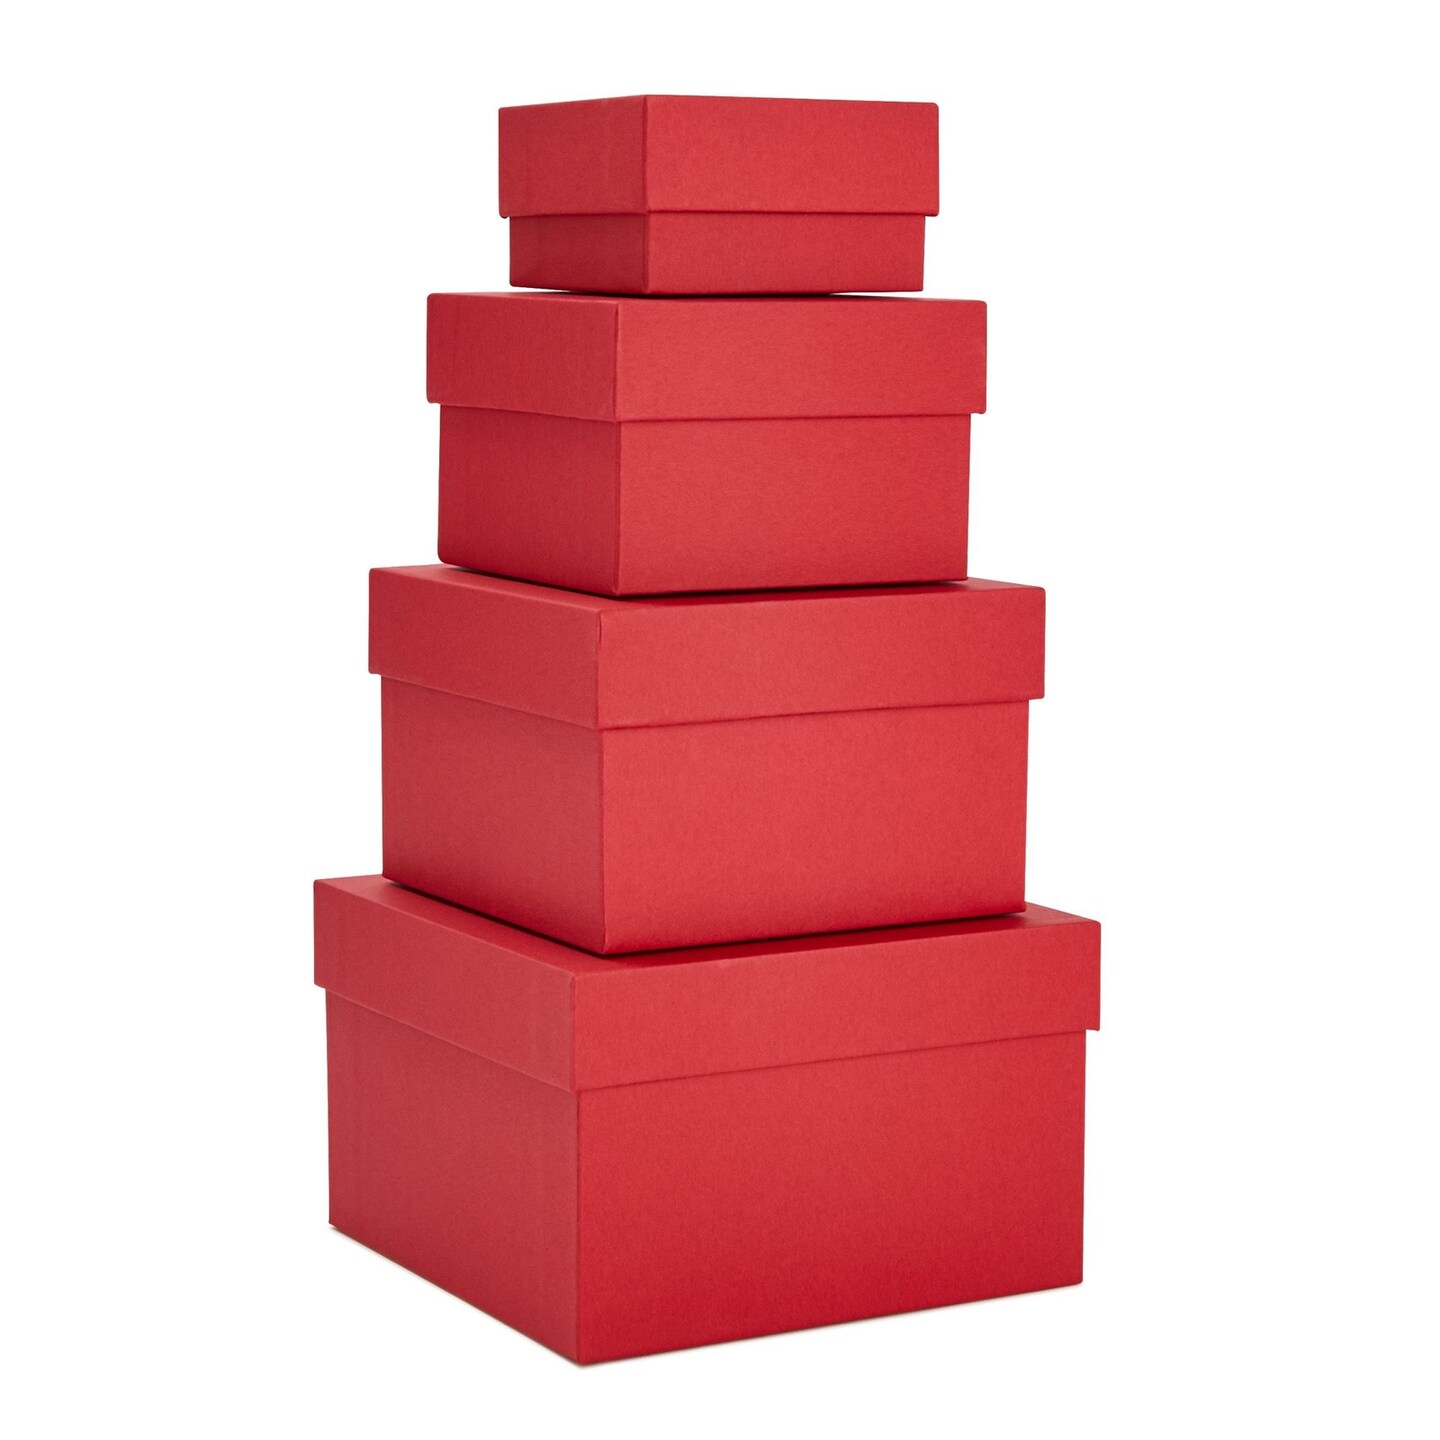 4 Pack Square Nesting Gift Boxes, Decorative Boxes with Lids in 4